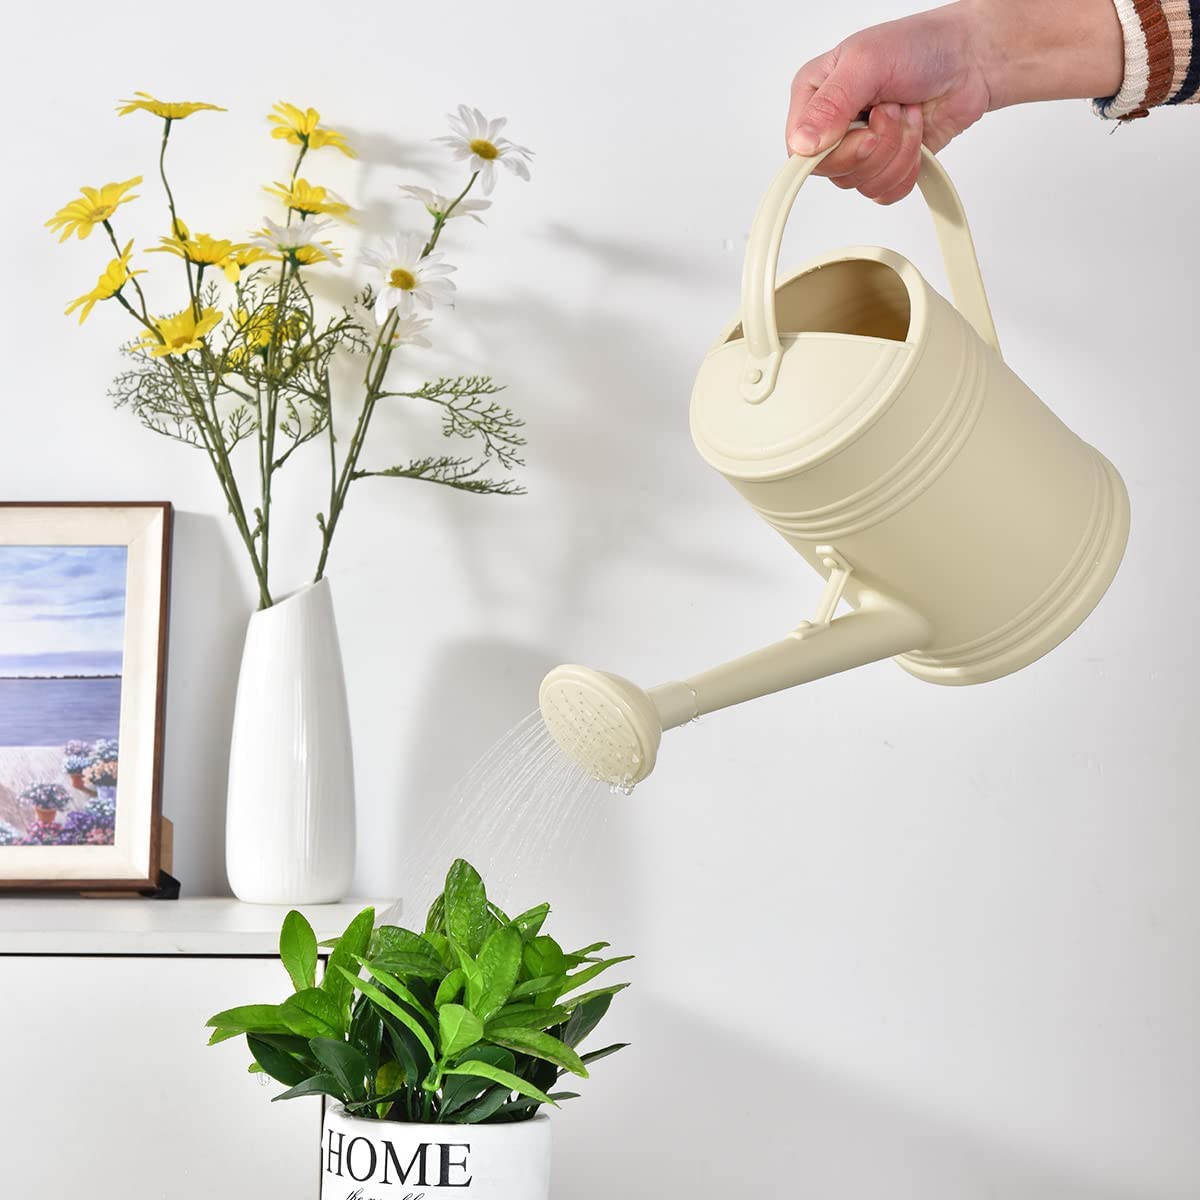 48% off! Watering Can for Indoor Plants only $13.99 (was $26.99) Thumbnail